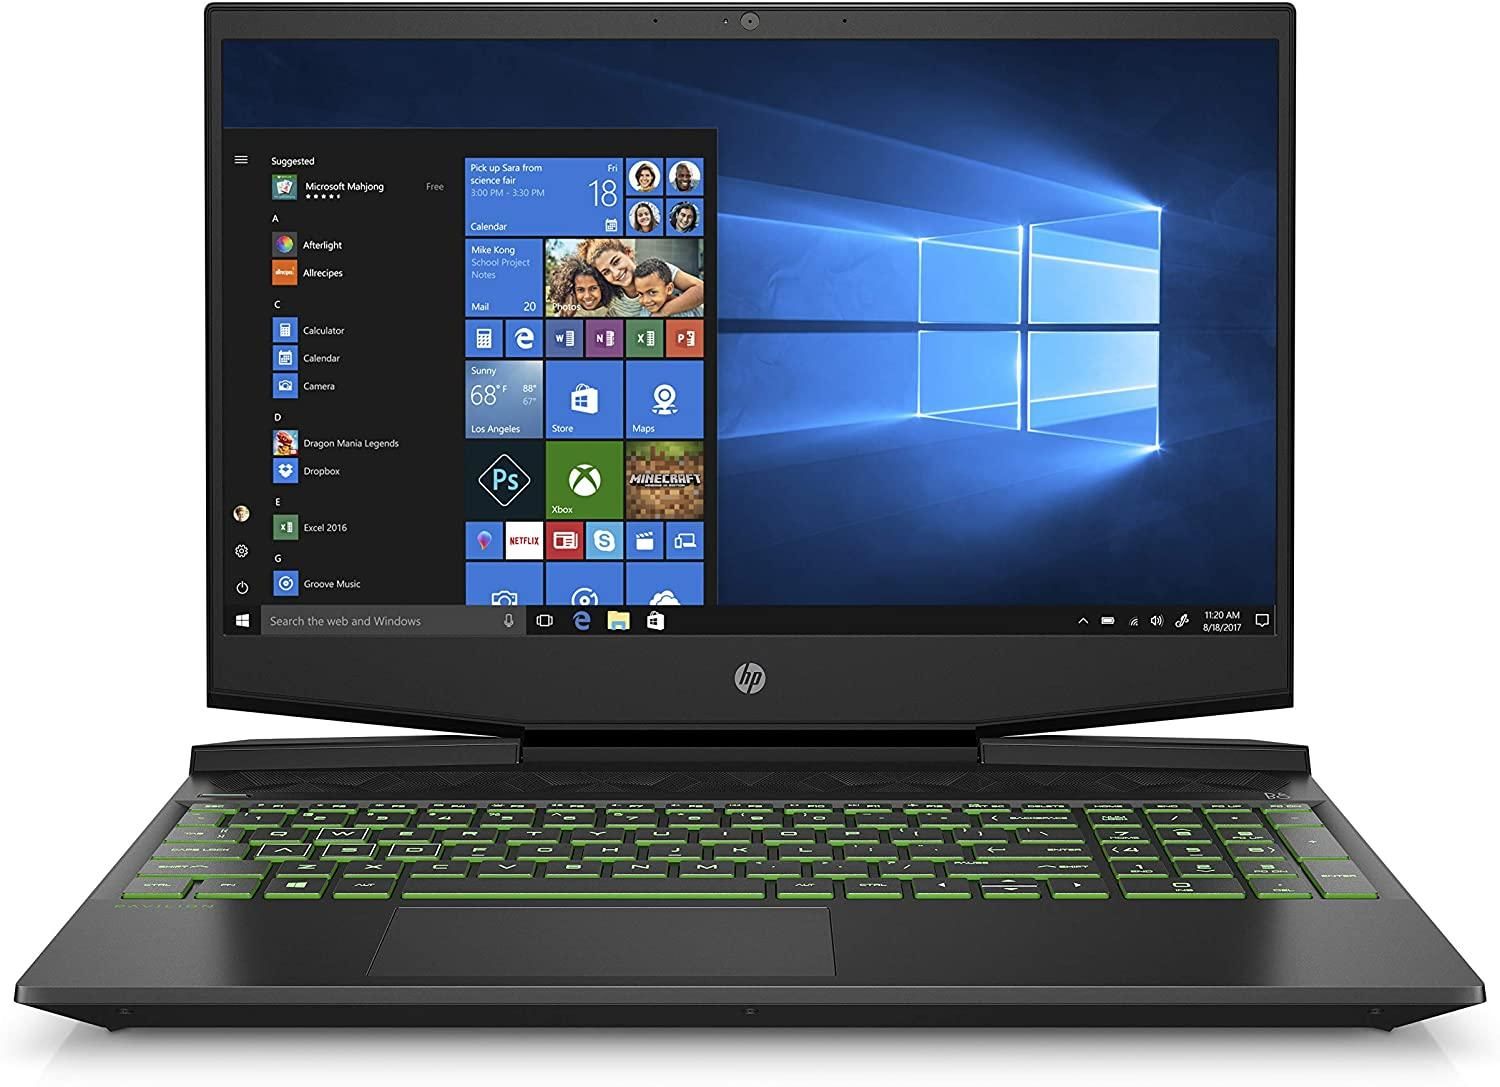 HP Pavilion Gaming 15.6-Inch Micro-EDGE Laptop Product box image